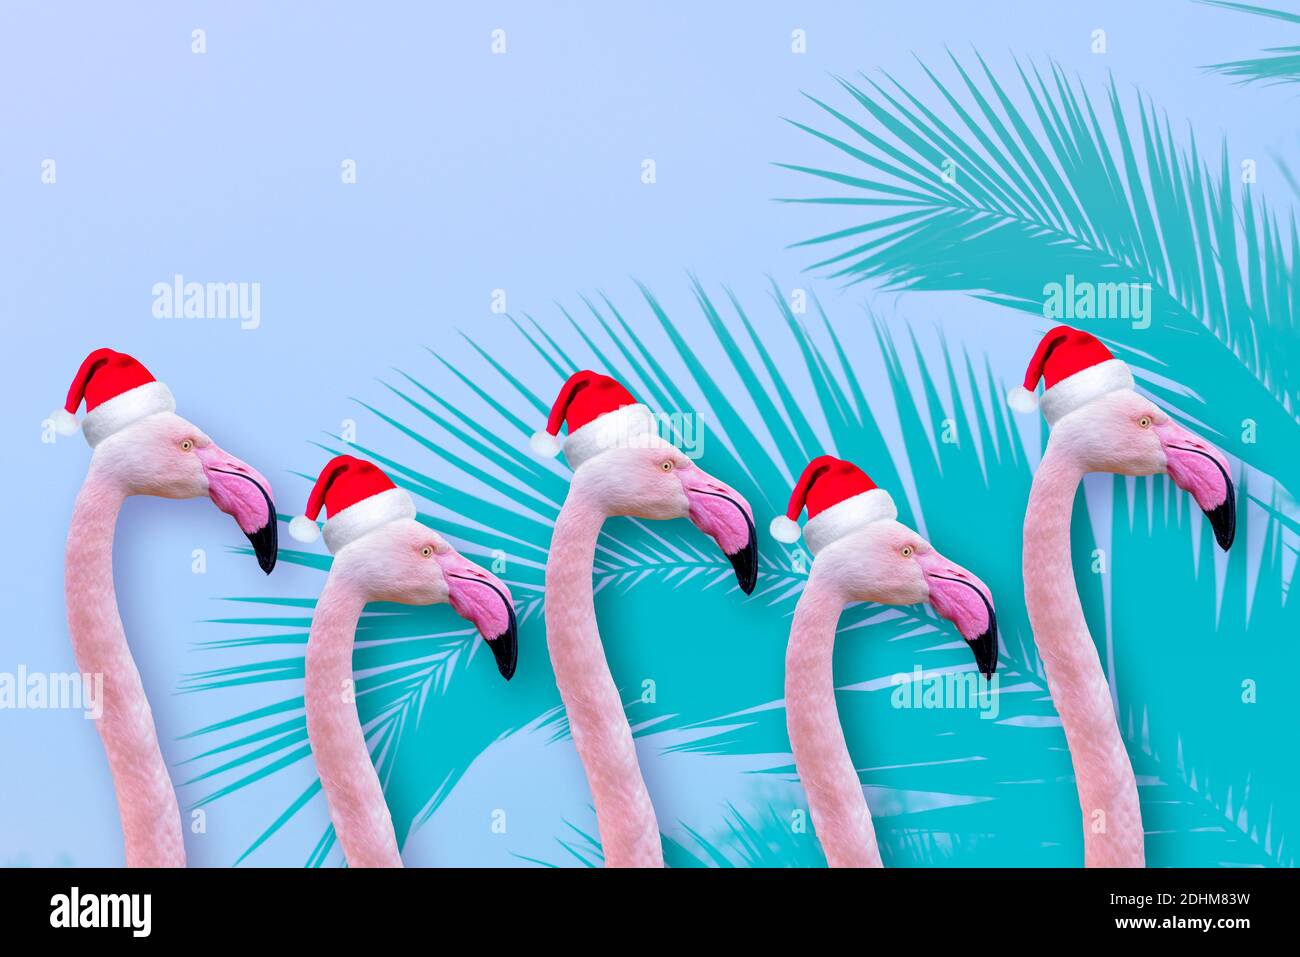 Festive flamingo Greeting or Christmas card with funny animals in xmas santa hats with space for a message Stock Photo